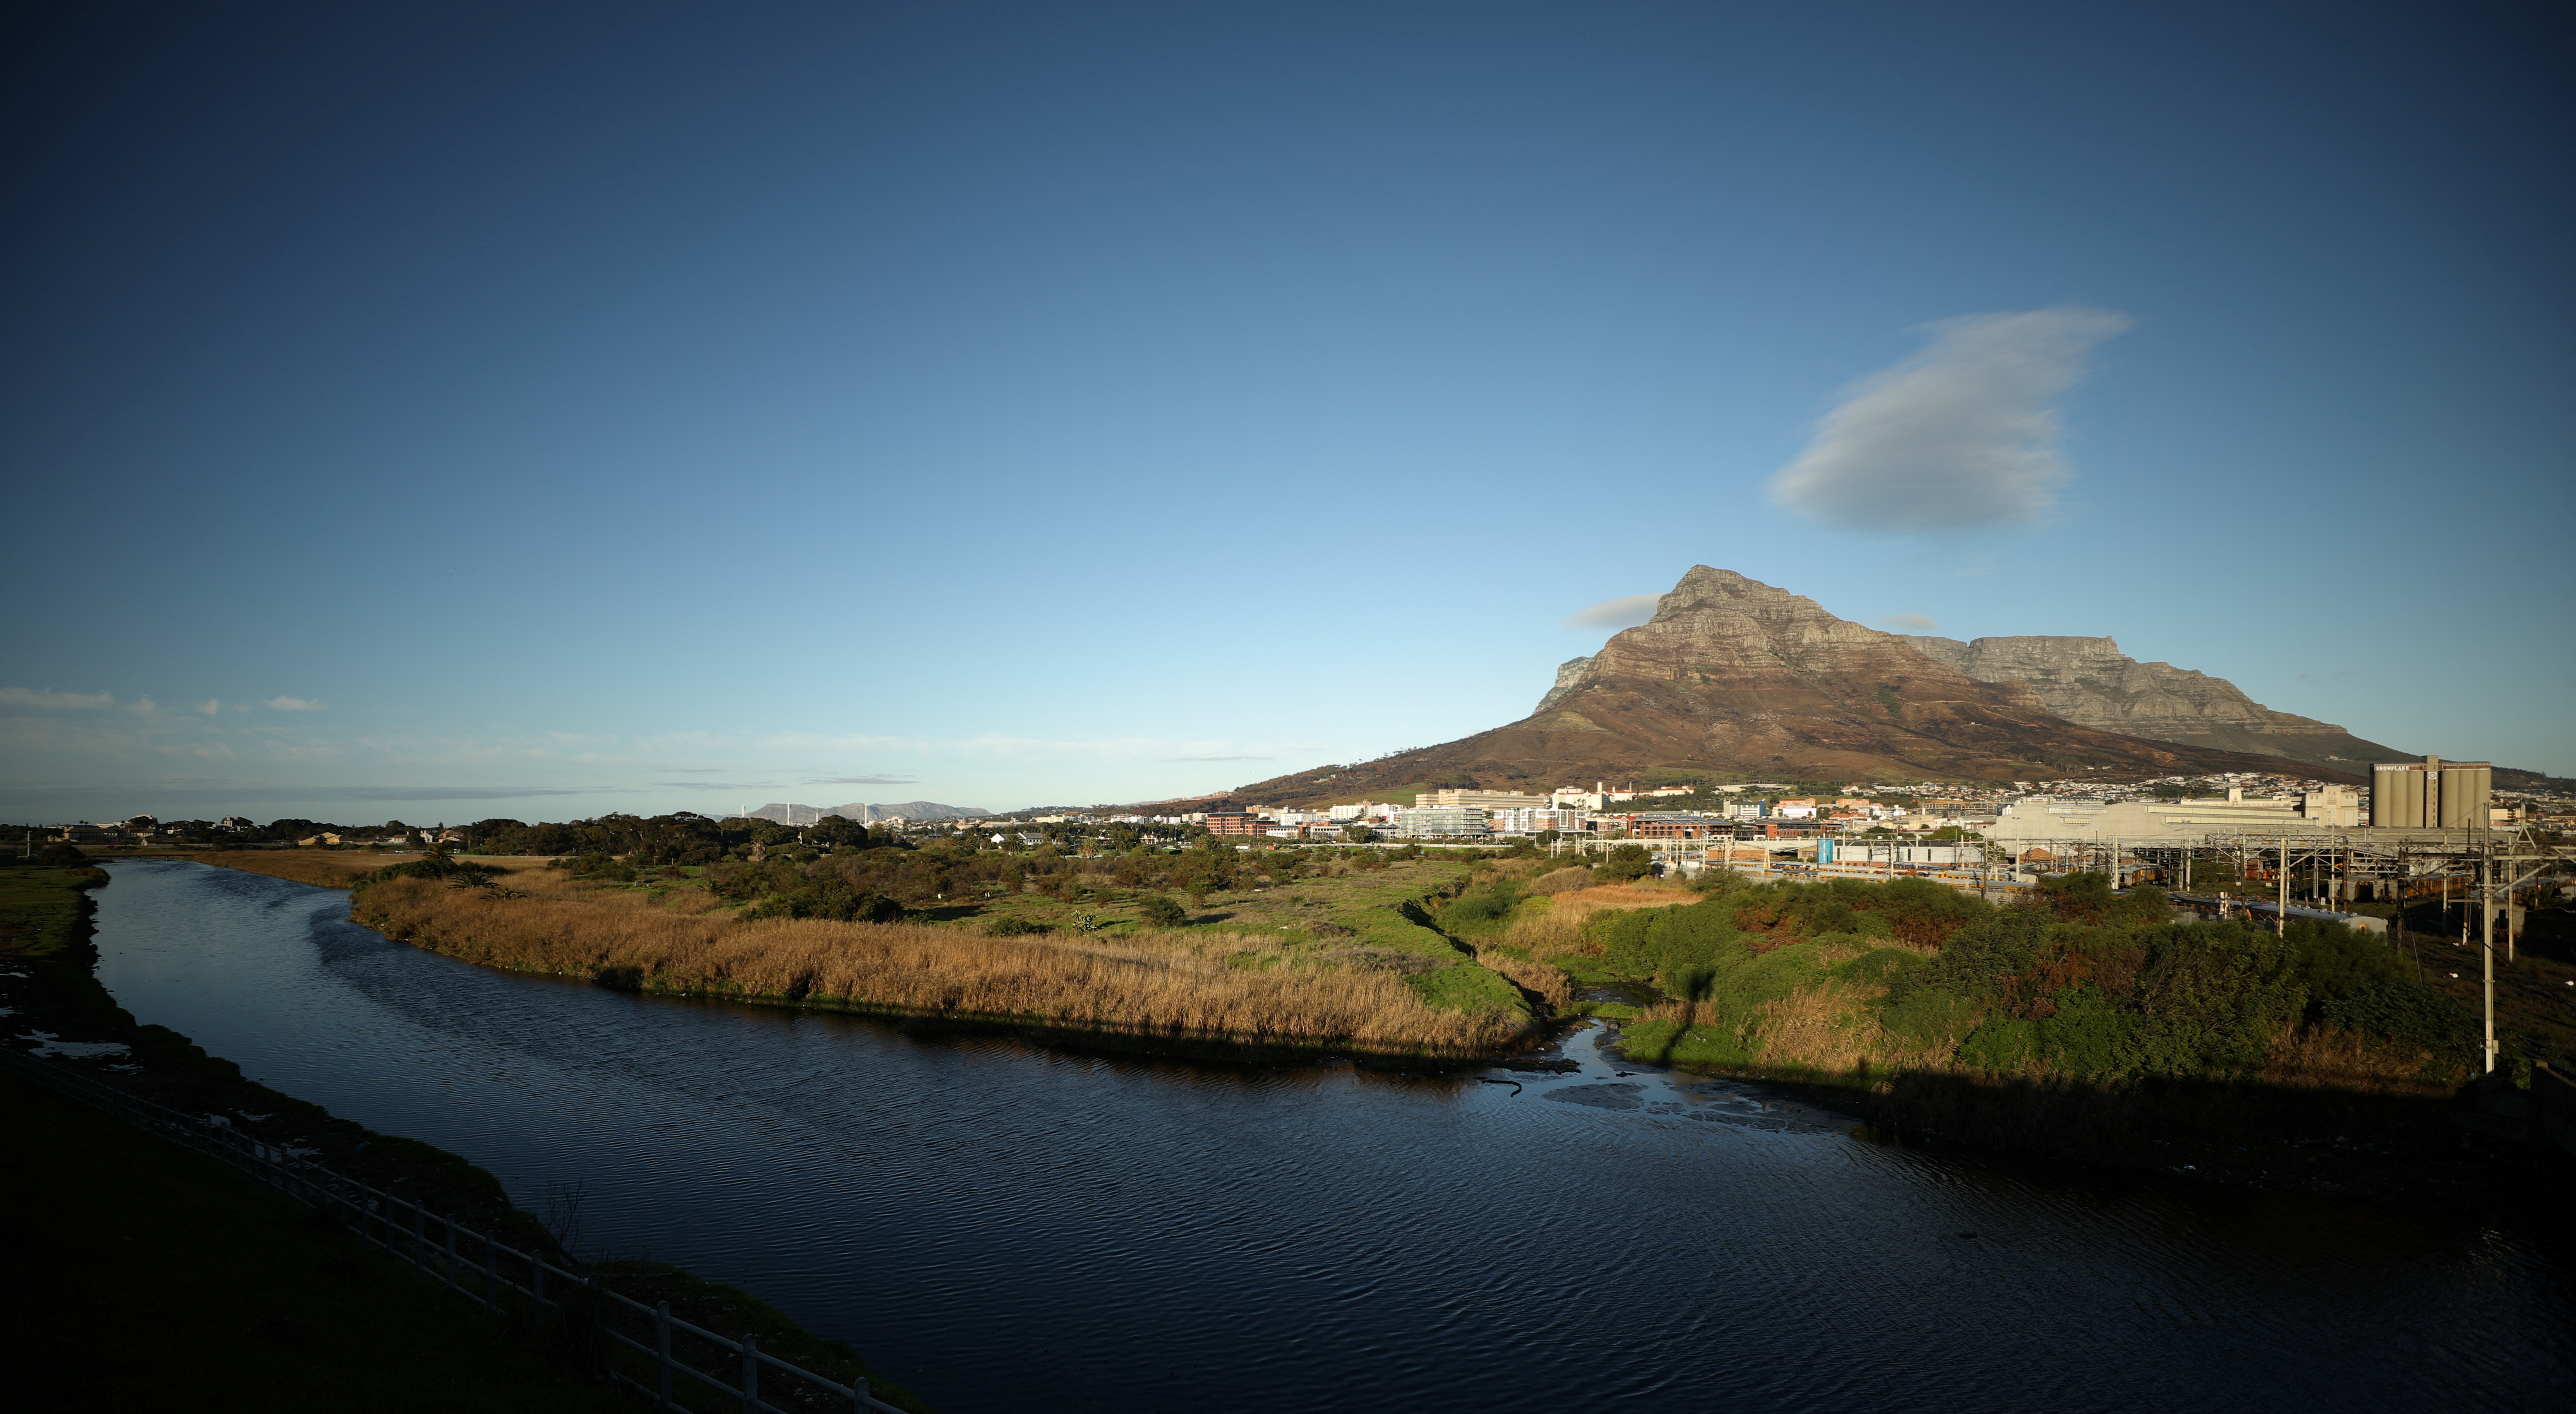 Contested land earmarked for a development which includes a new Africa headquarters for U.S. retail giant Amazon is seen alongside the Black River in Cape Town